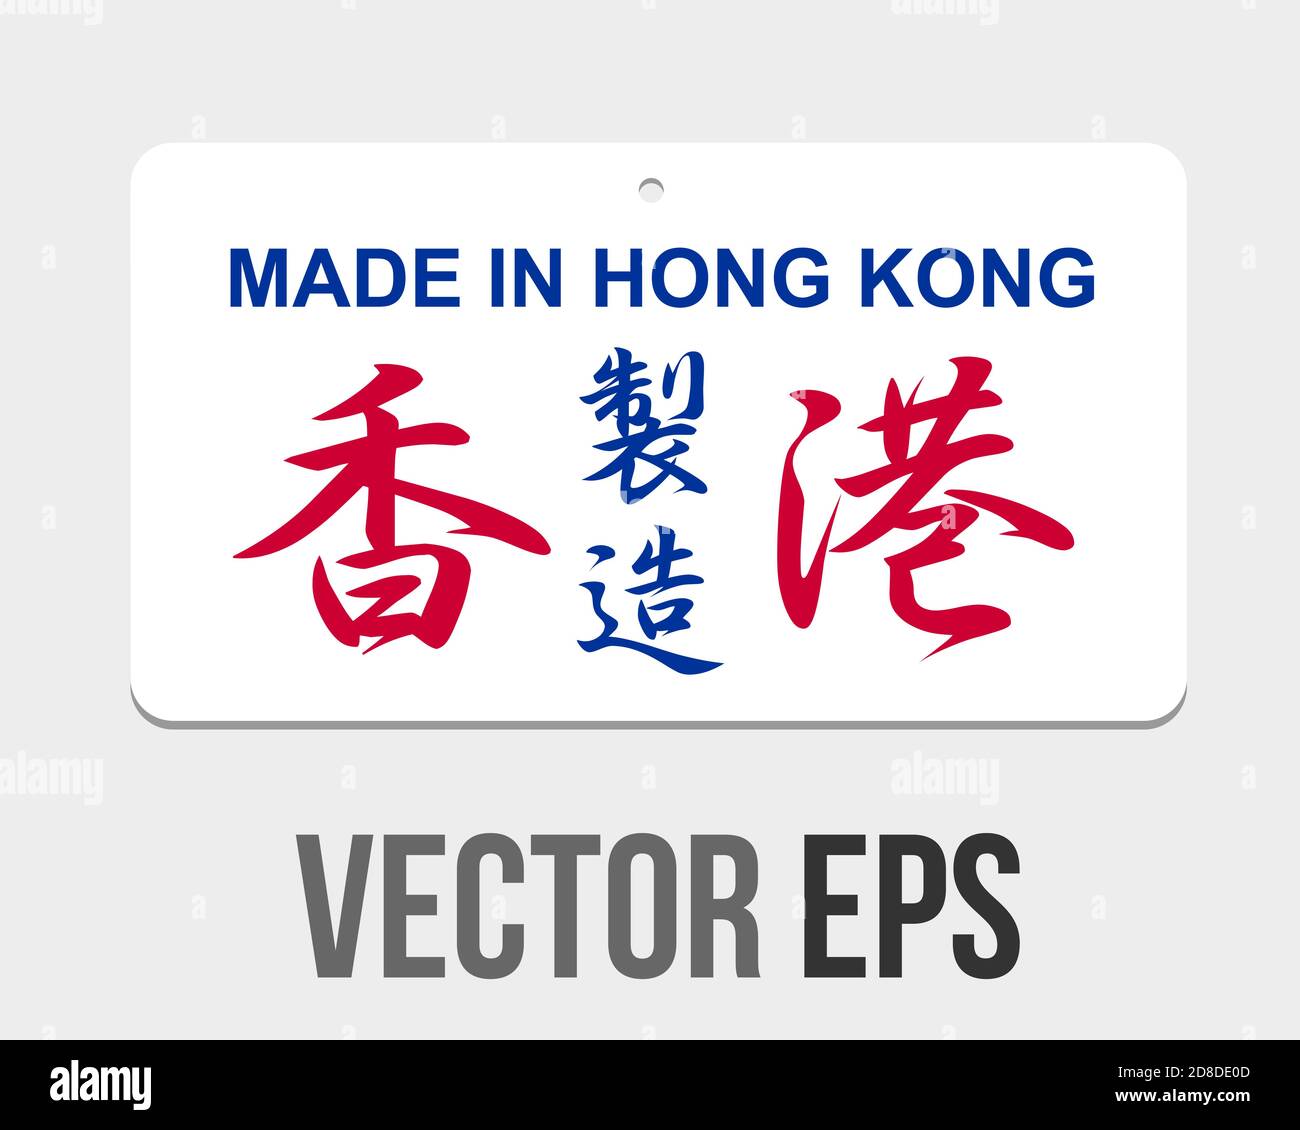 The isolated vector traditional Hong Kong retro style logo design, showing made in Hong Kong Chinese words Stock Vector